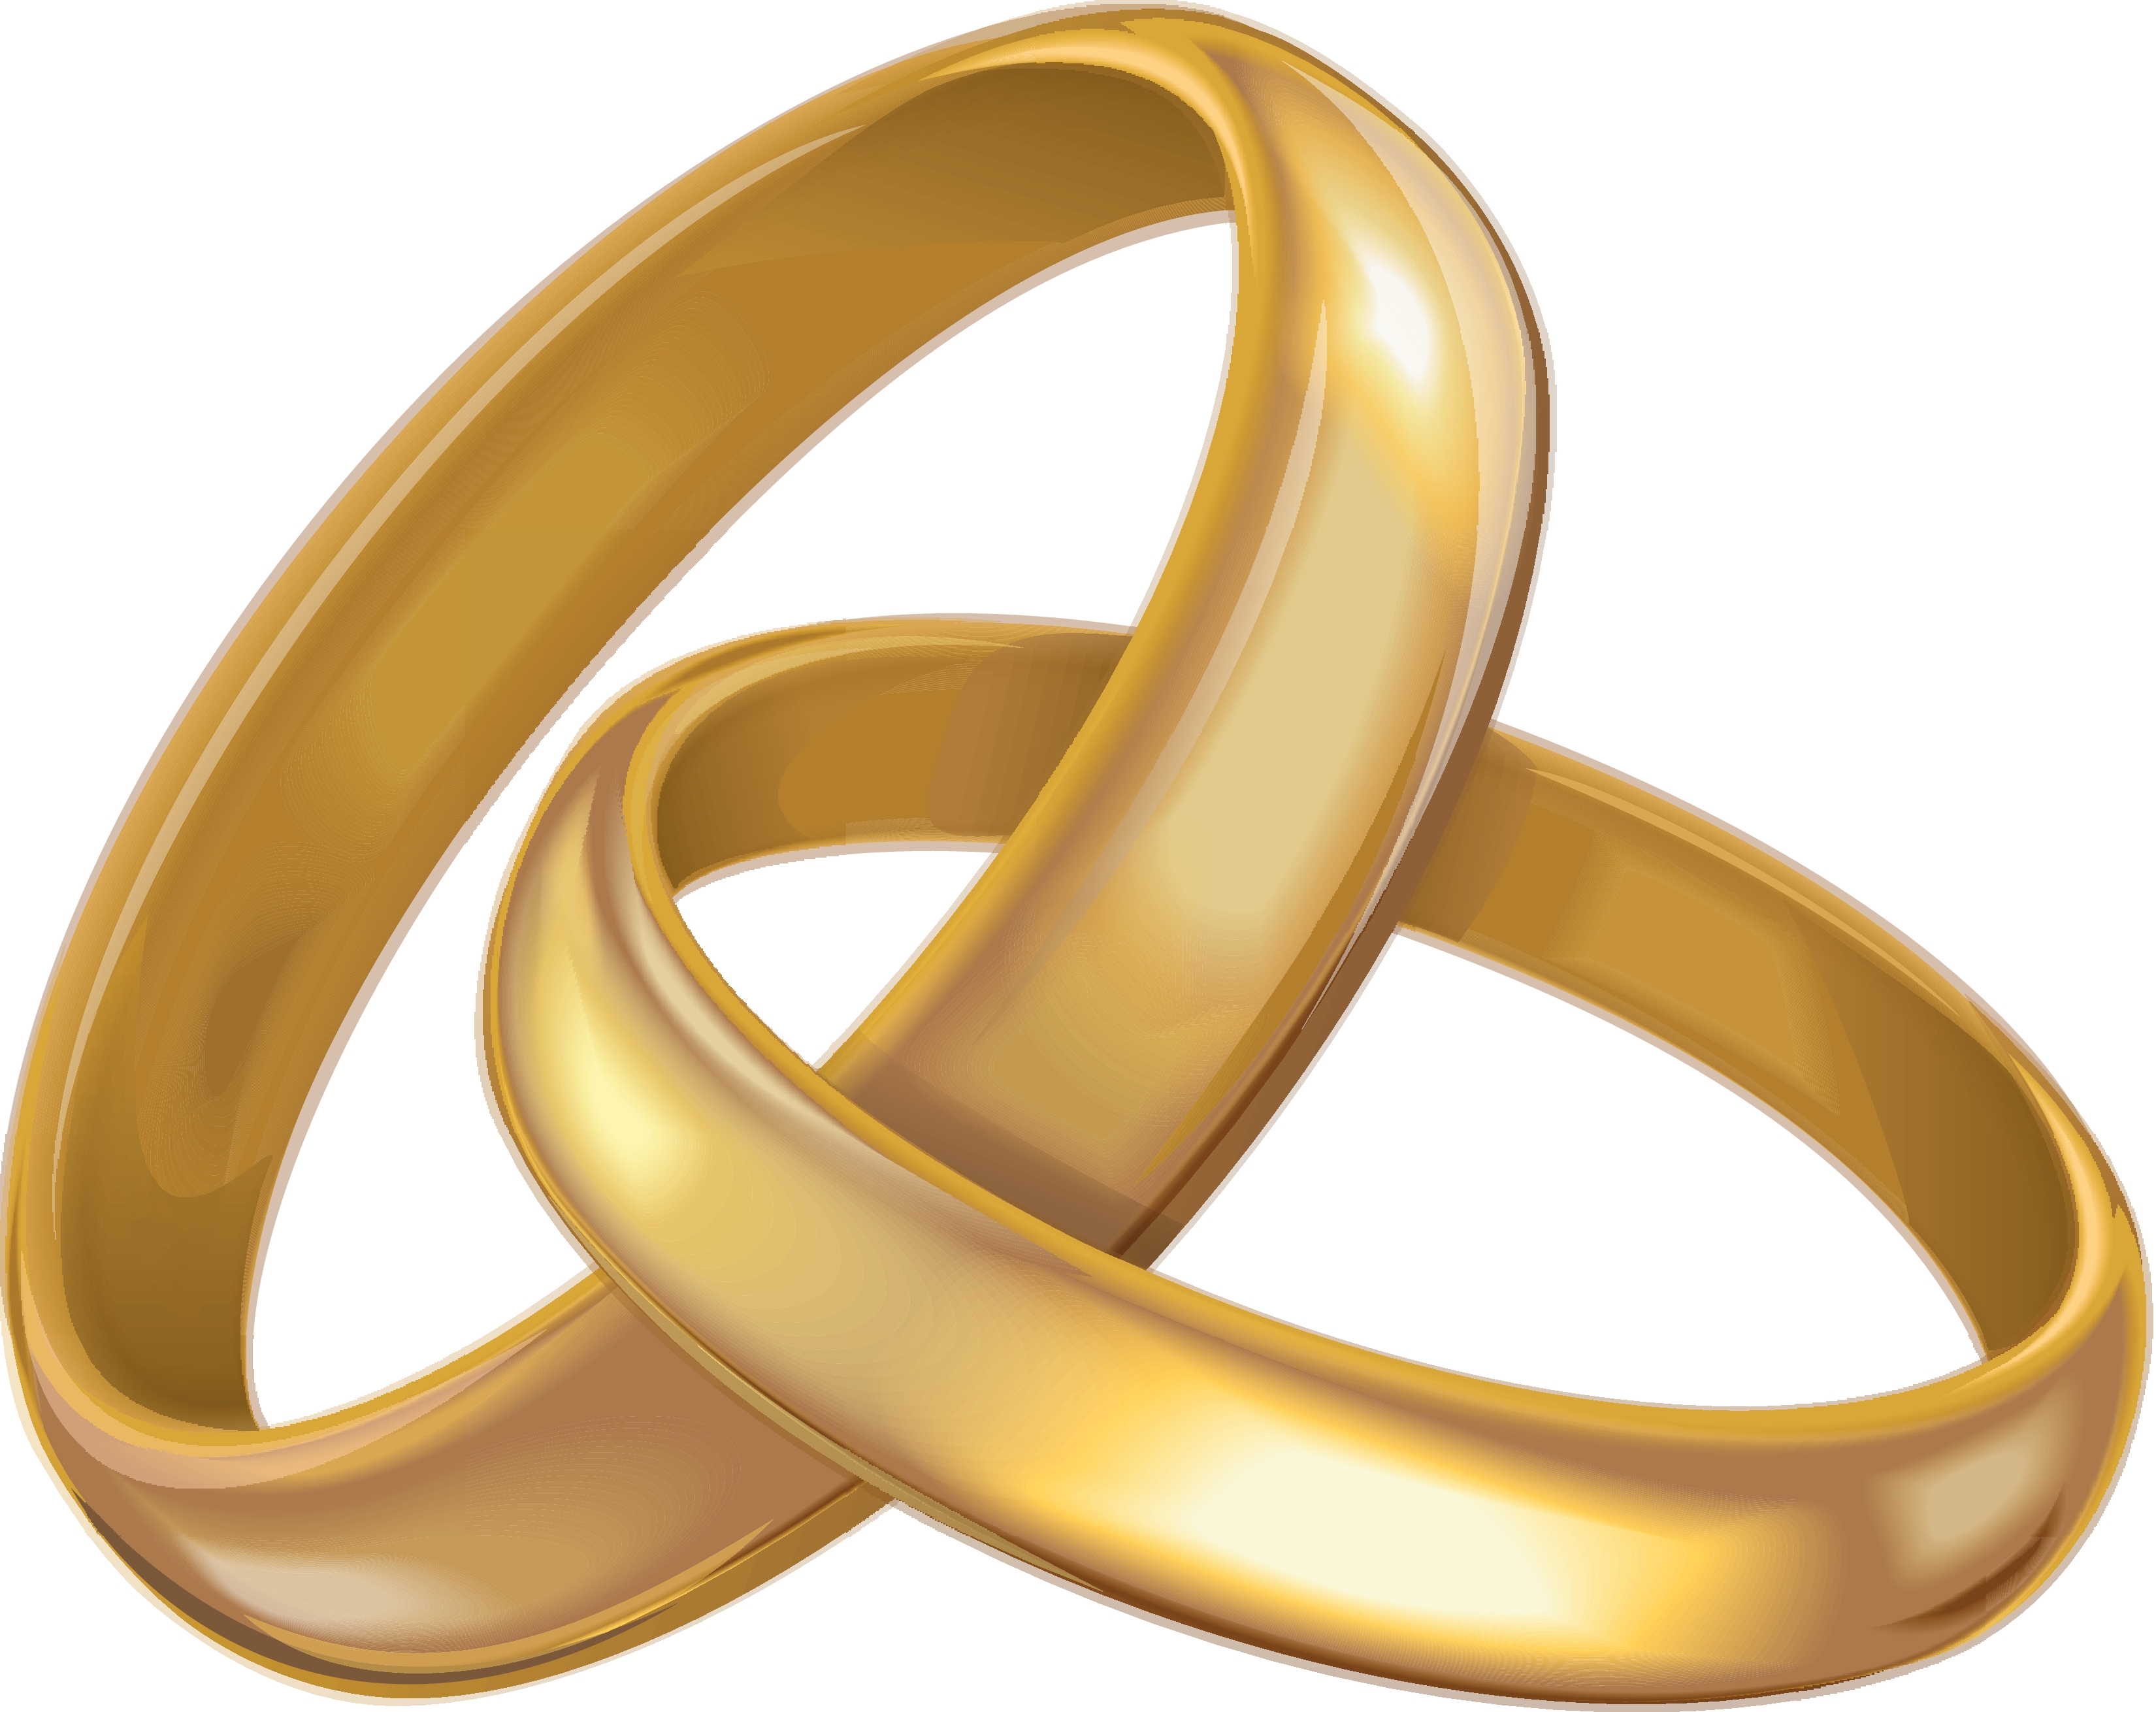 Wedding ring clip art pictures free clipart images 2 clipartcow 4